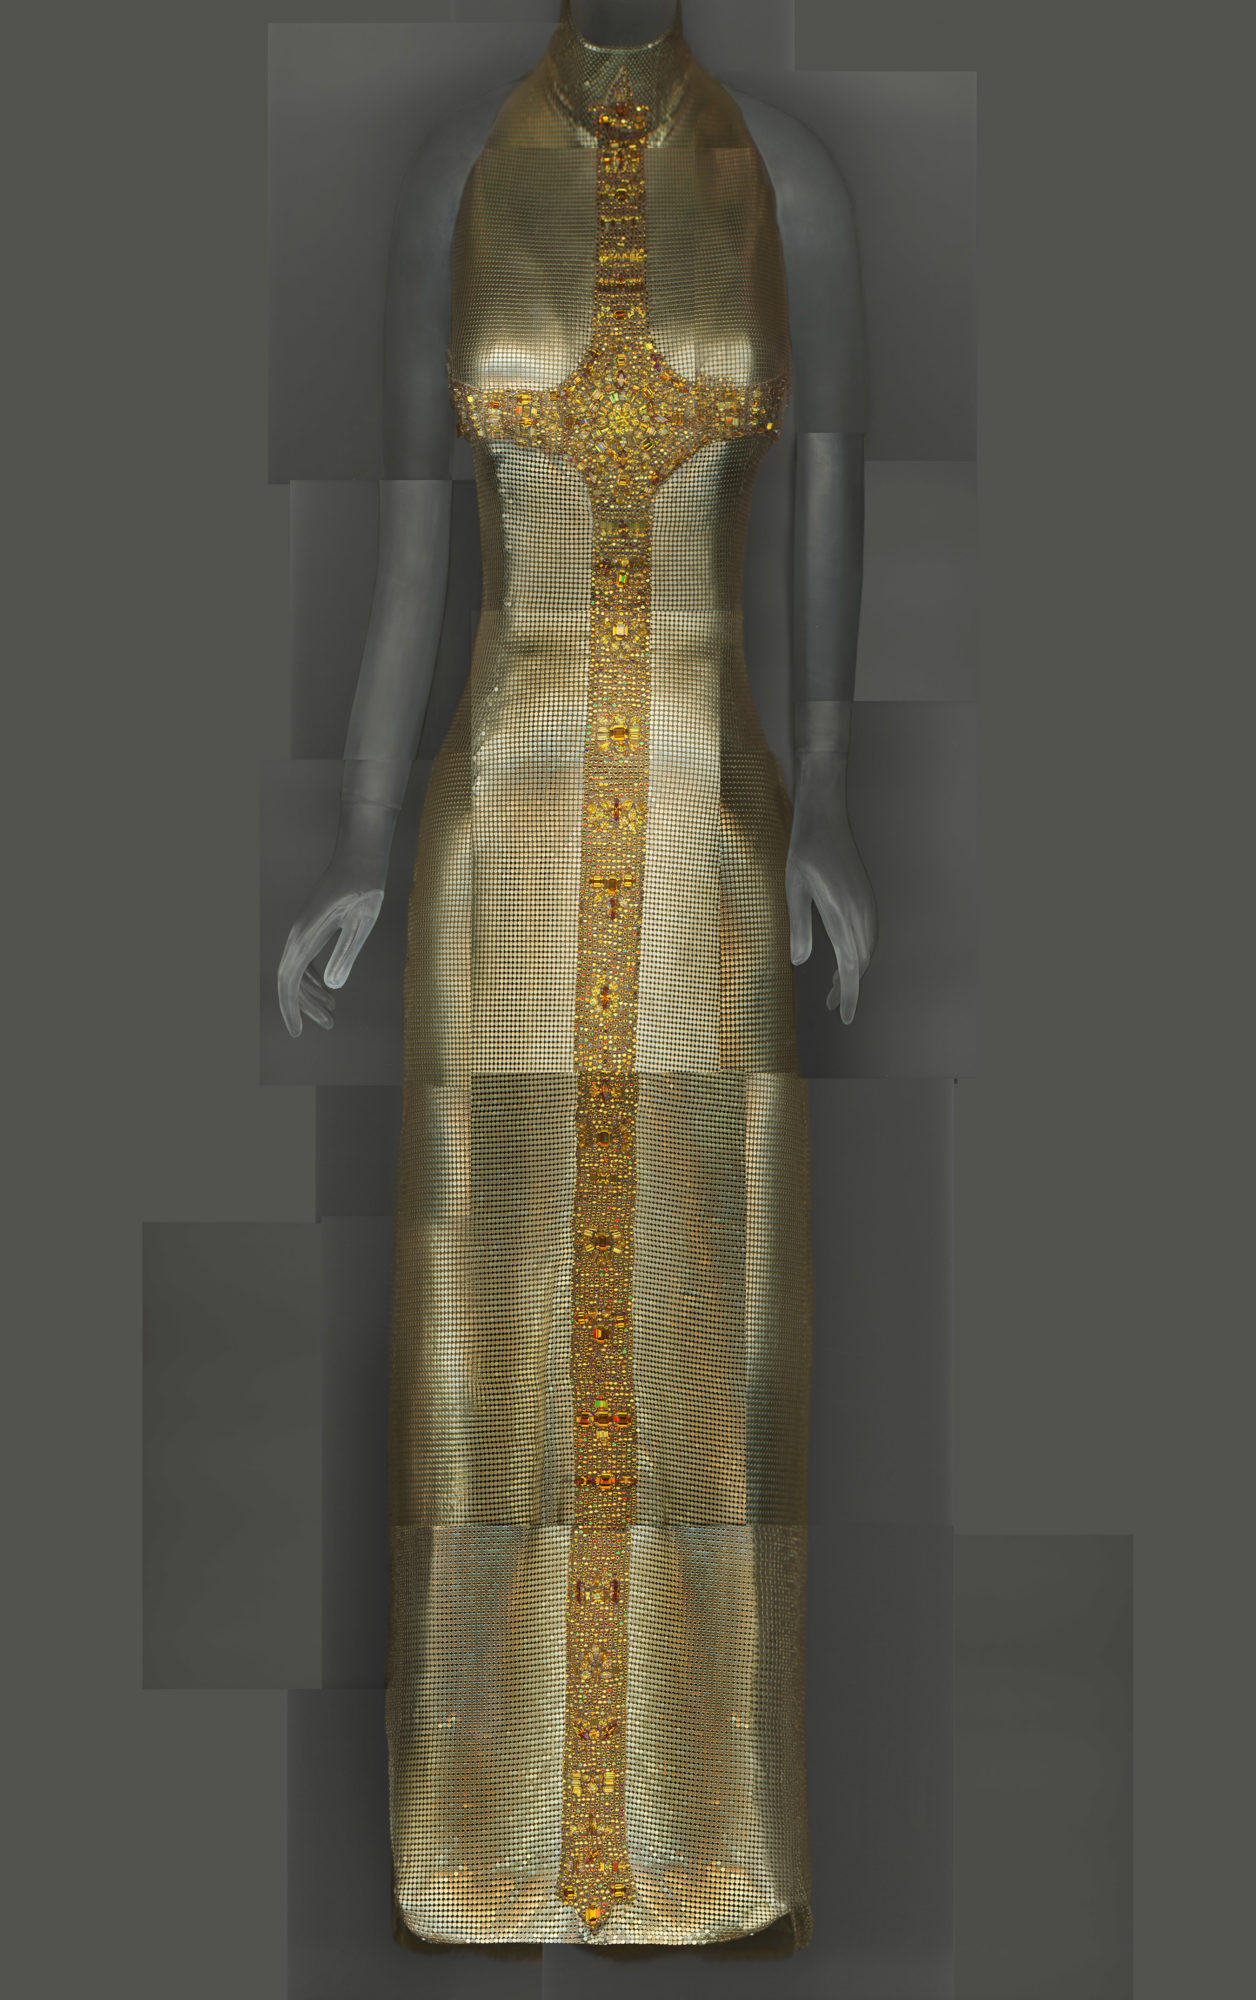 fitted, gold sleeveless gown with beadwork depicting a cross along the breast-line, and length of the body.